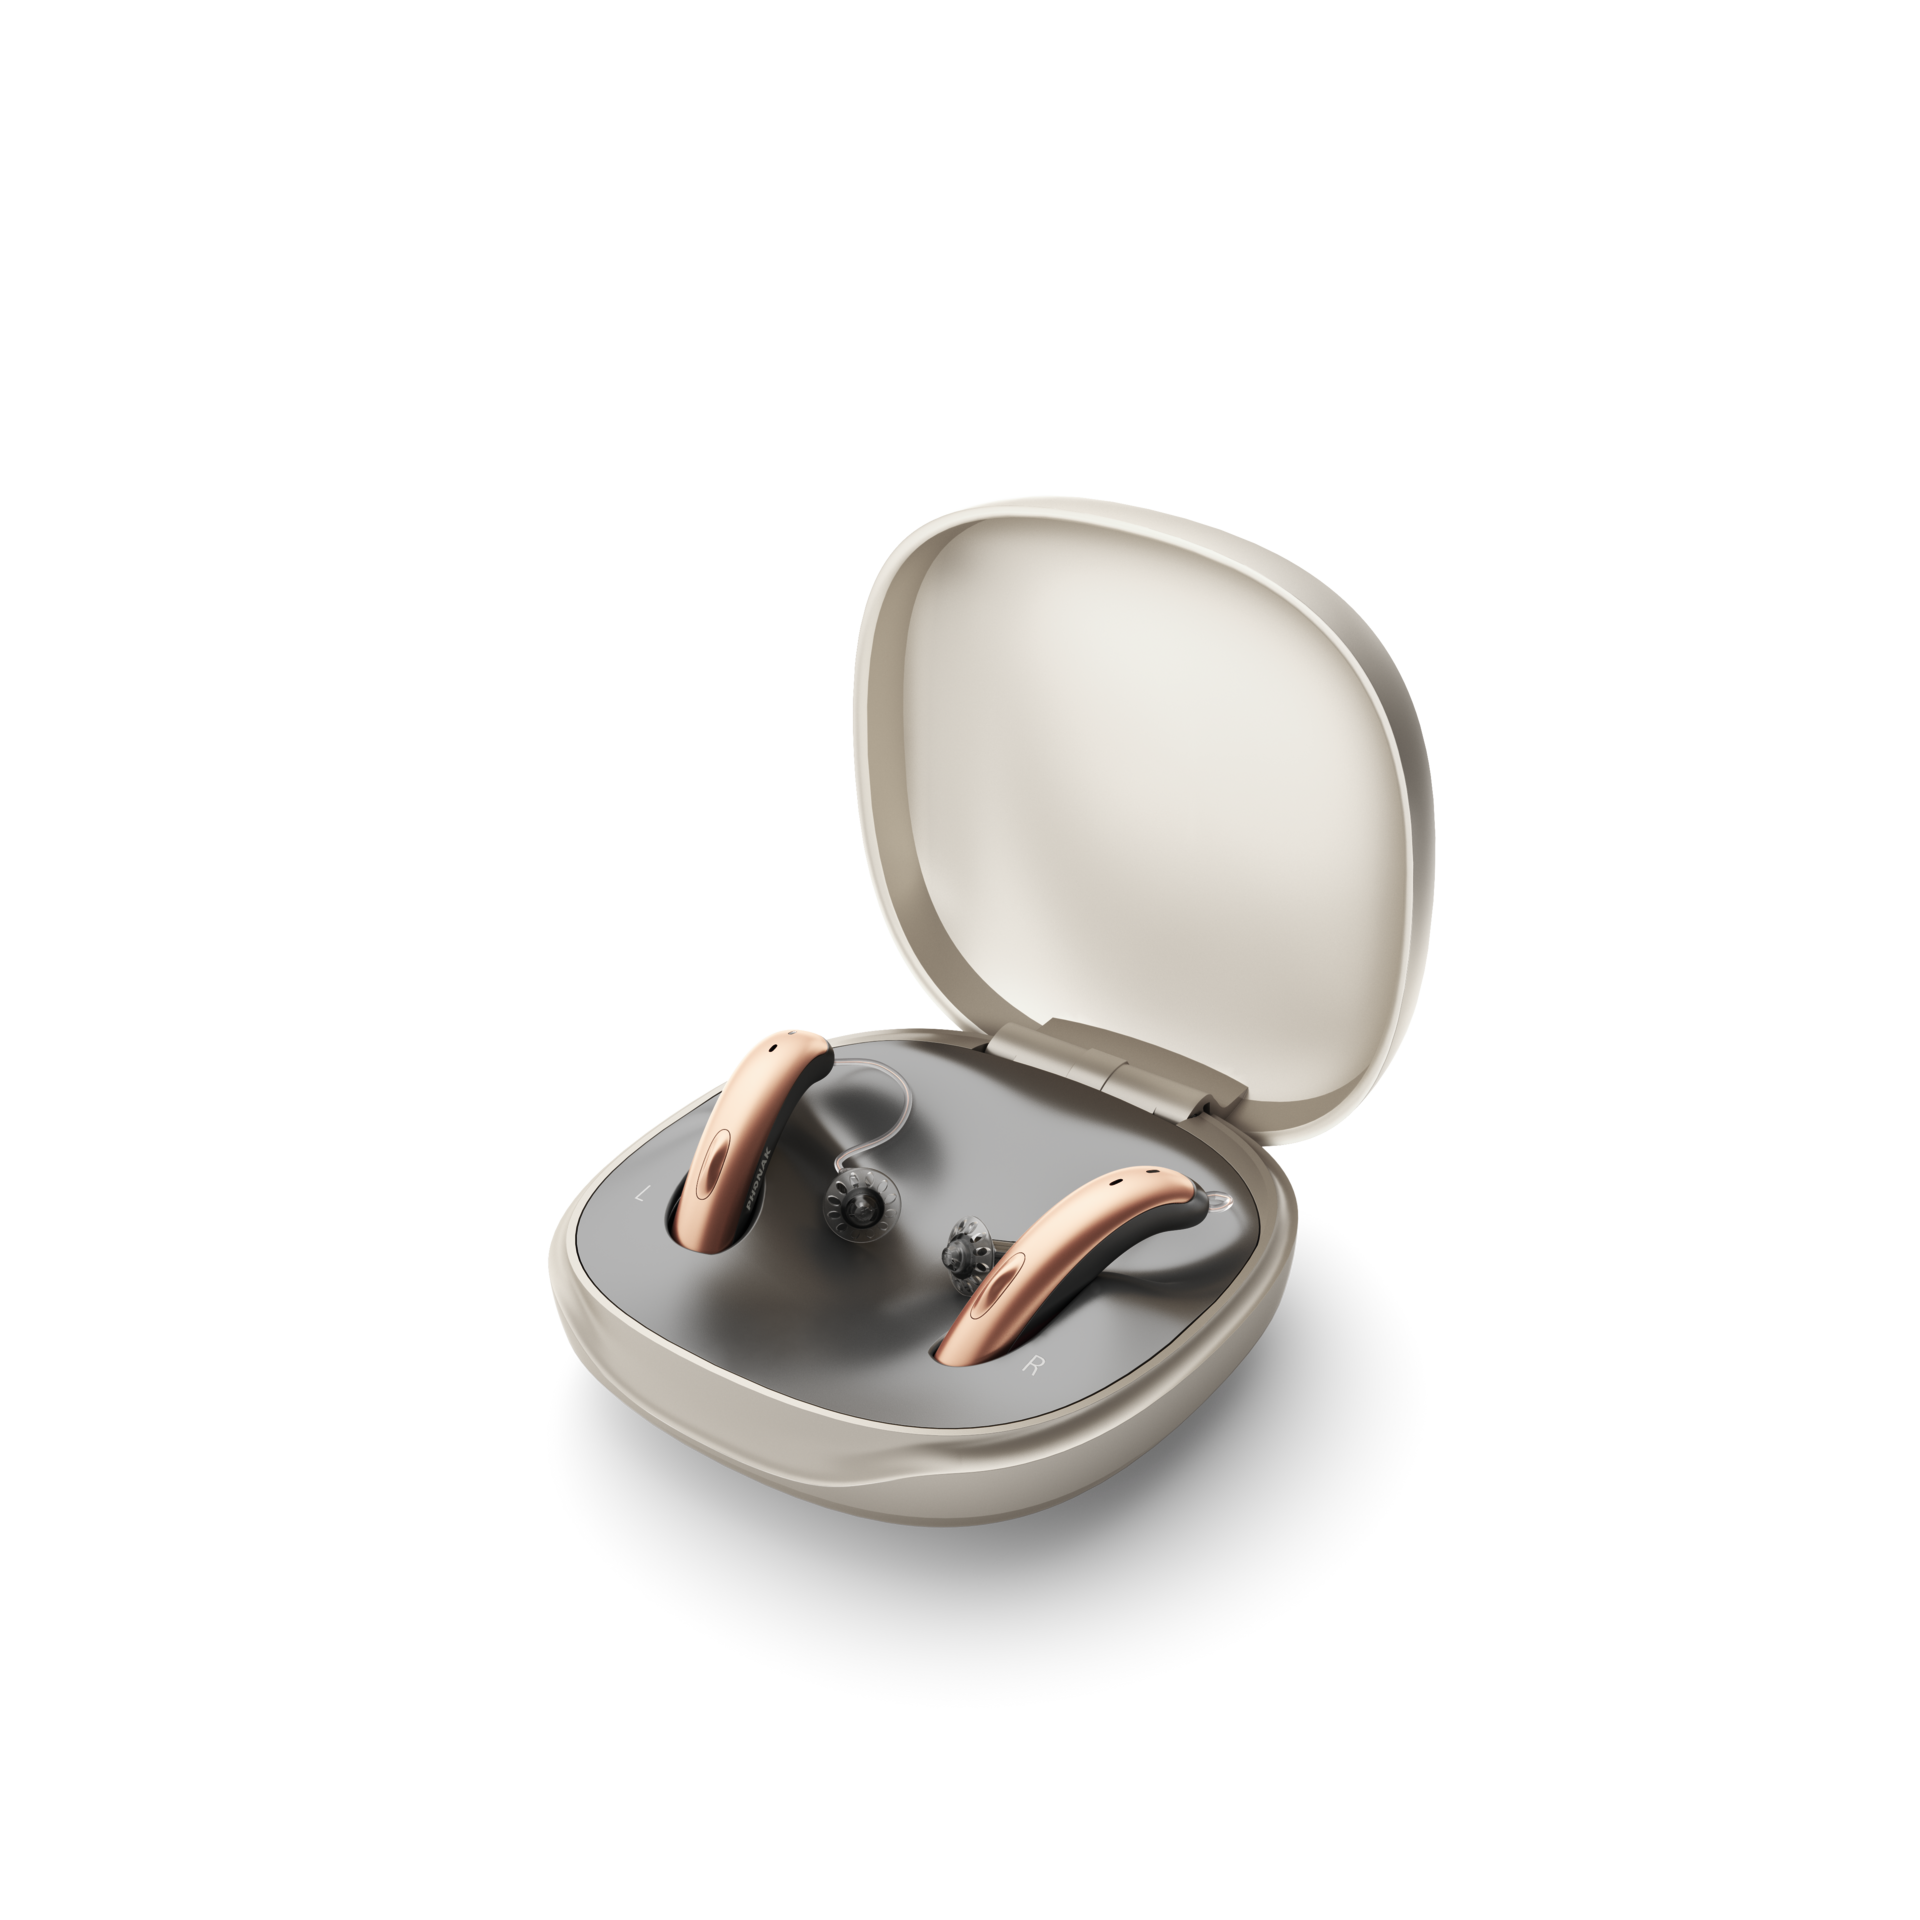 Small hearing aid in charging case